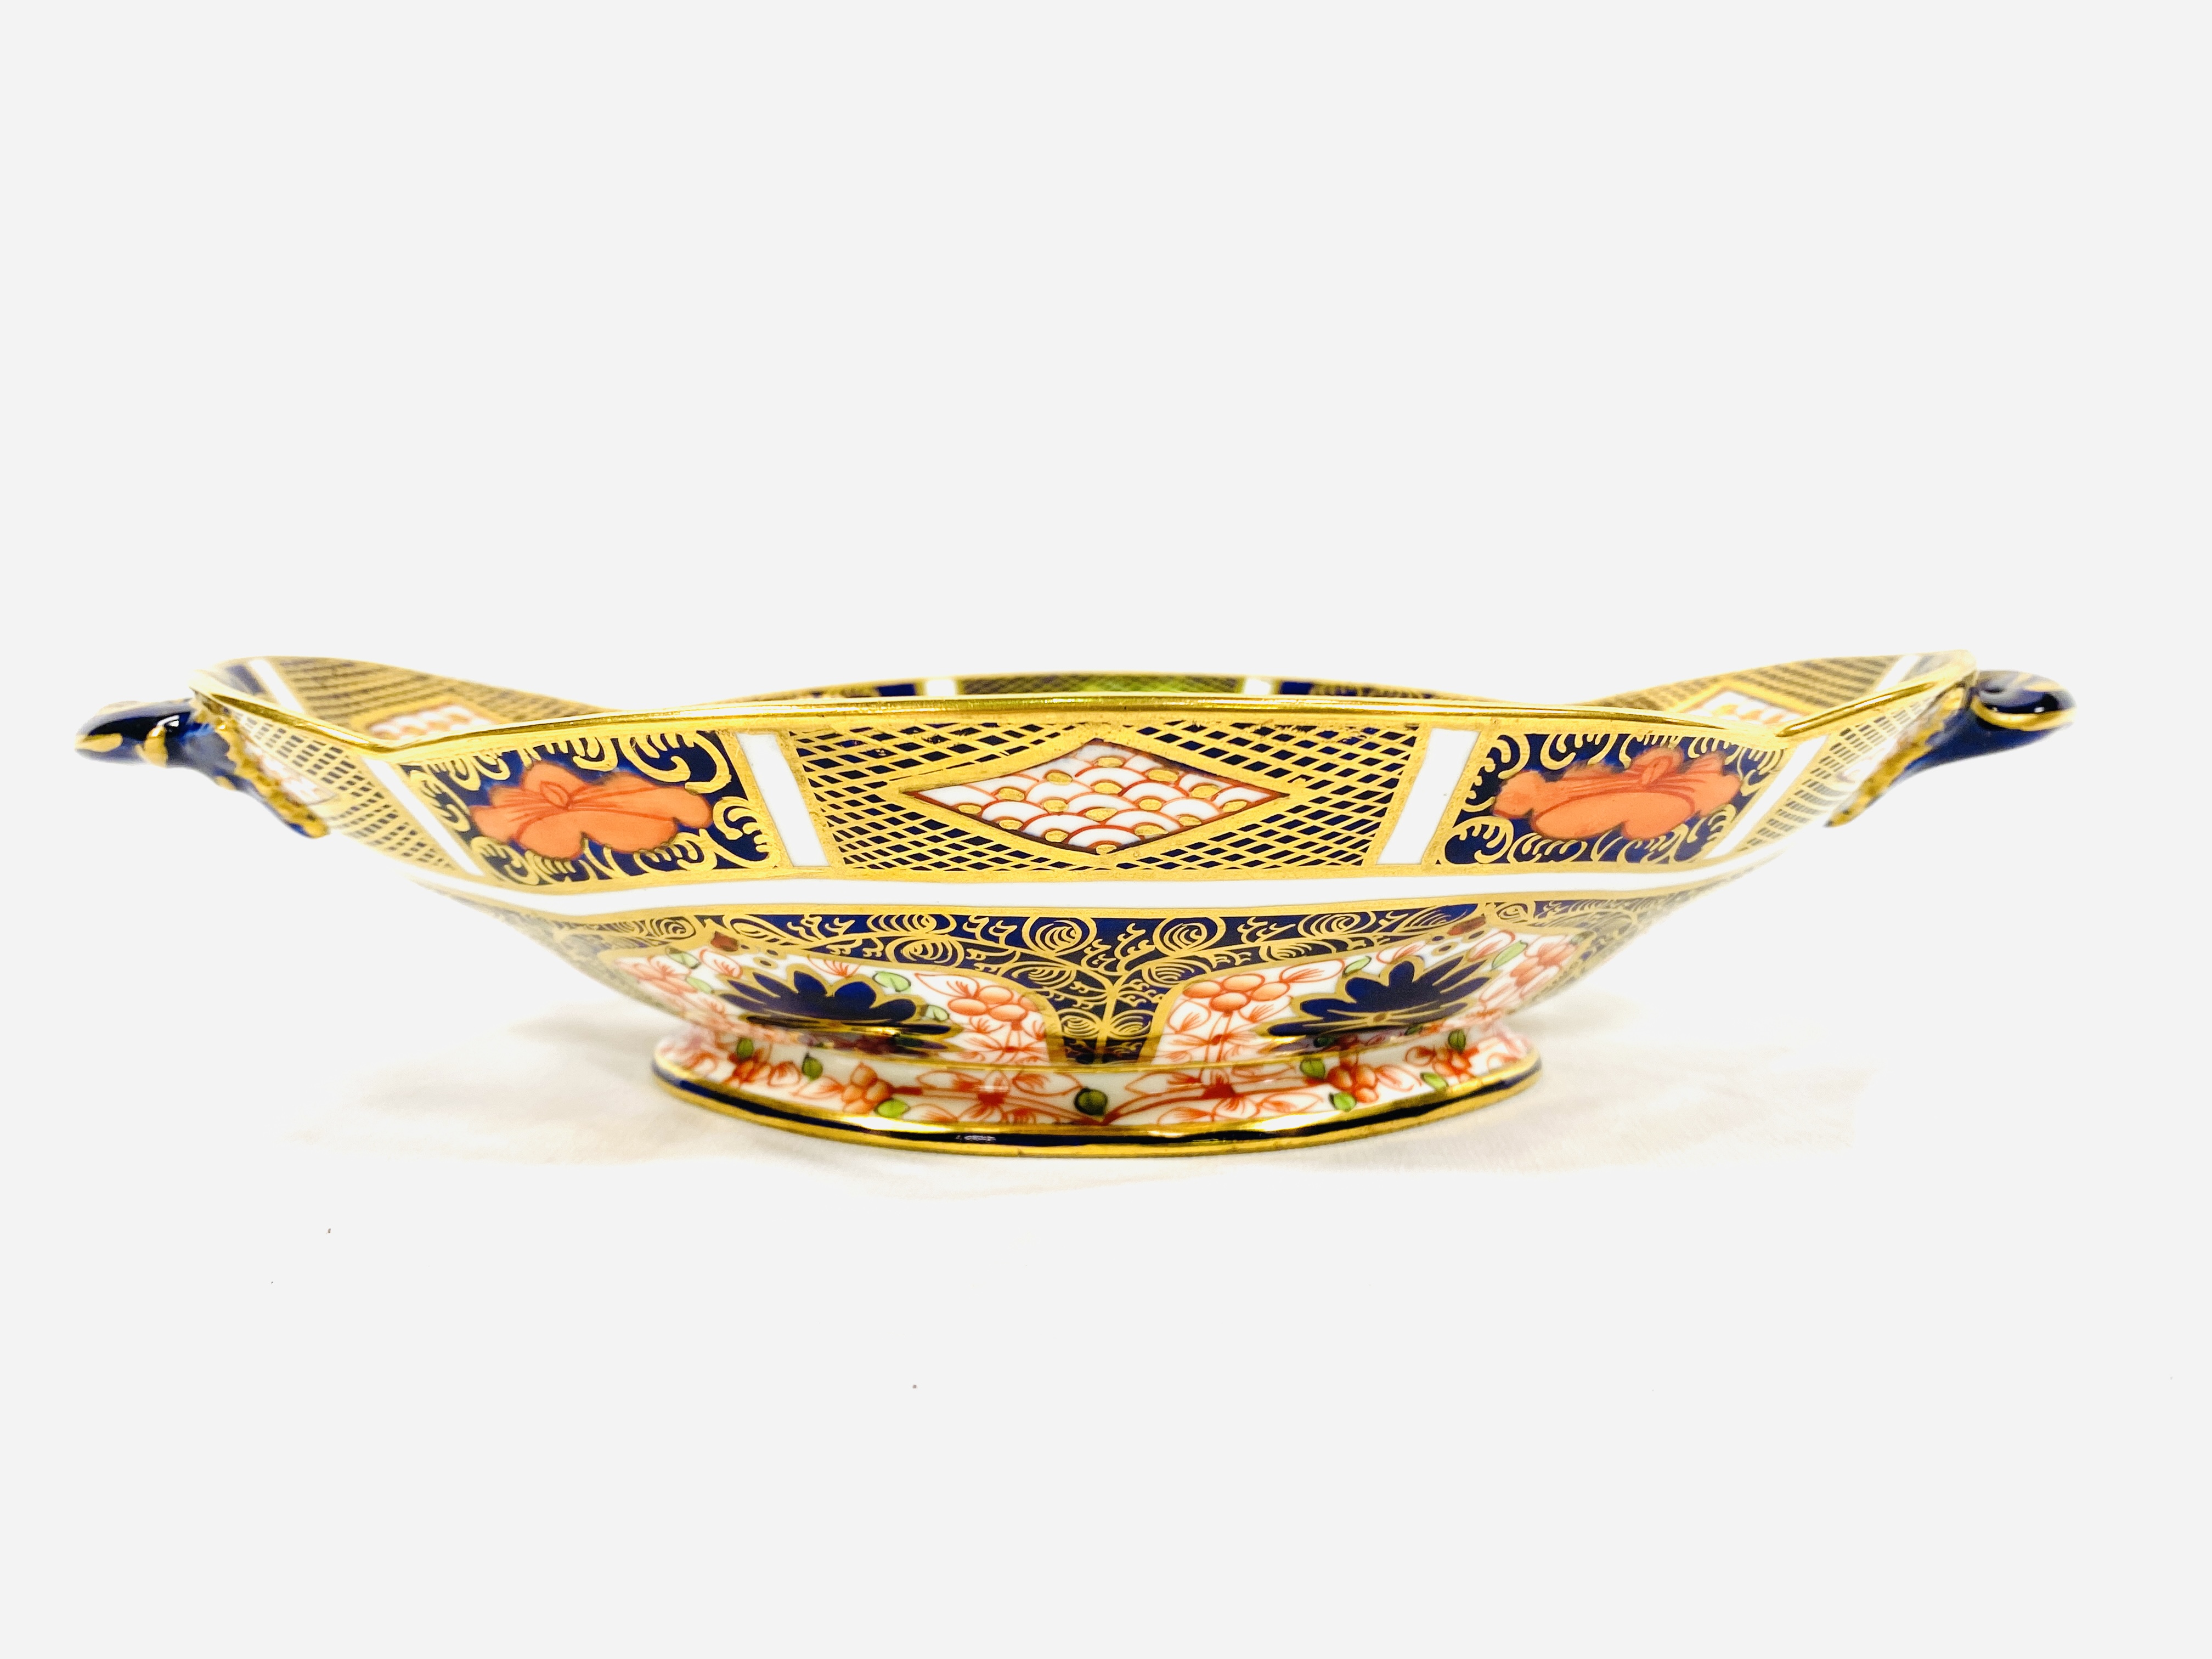 Items of Royal Crown Derby - Image 7 of 9